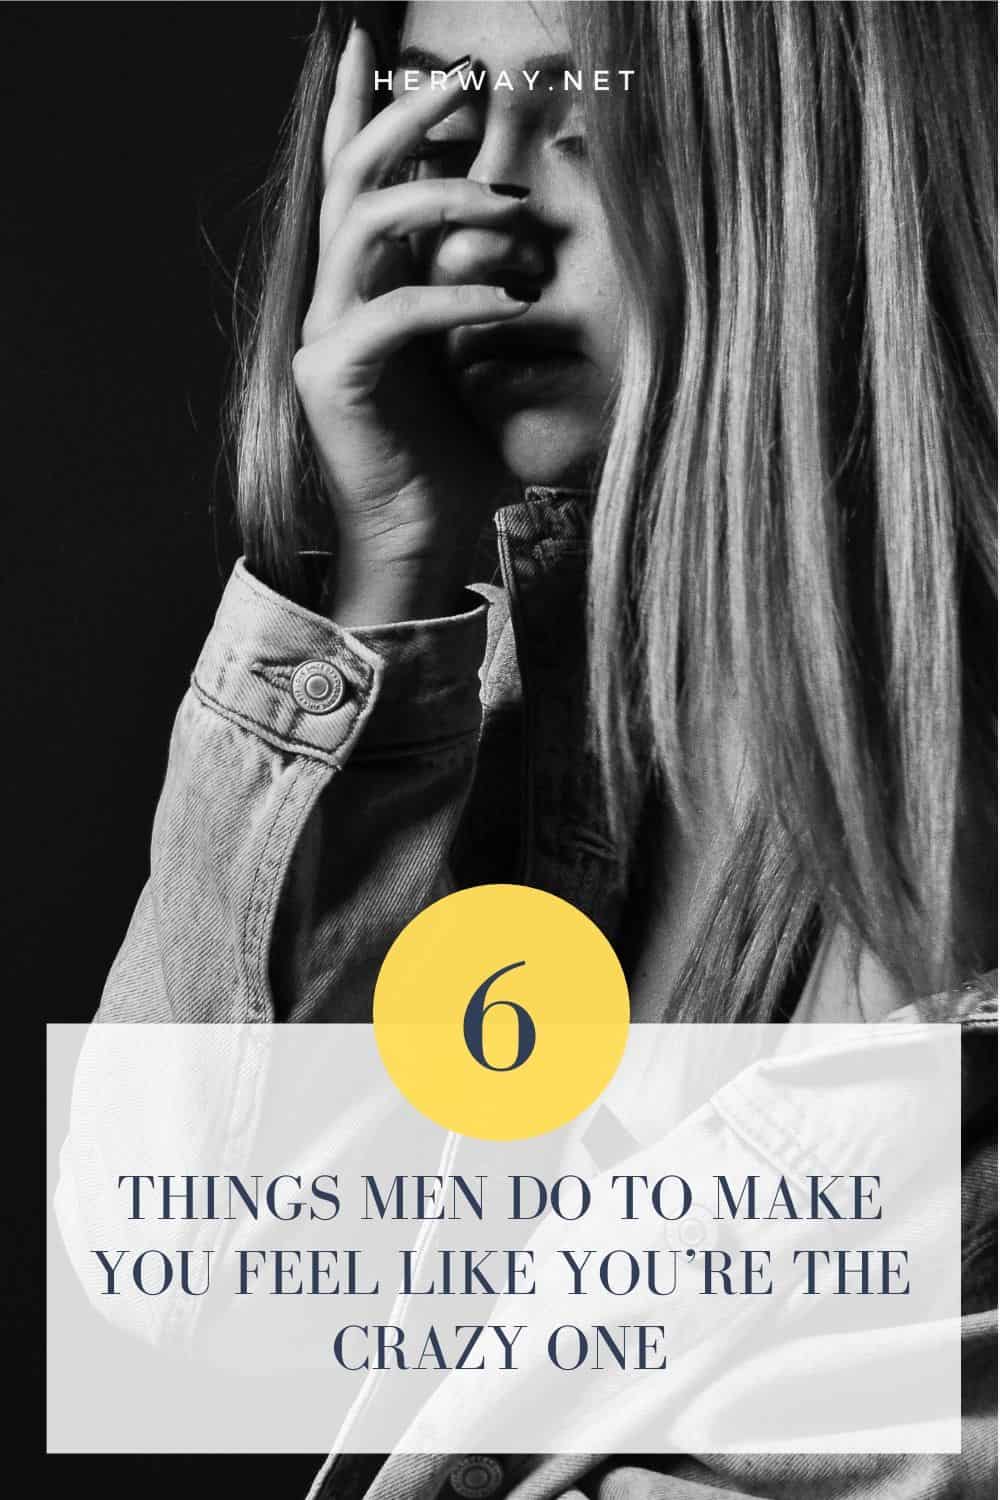 THINGS MEN DO TO MAKE YOU FEEL LIKE YOU’RE THE CRAZY ONE